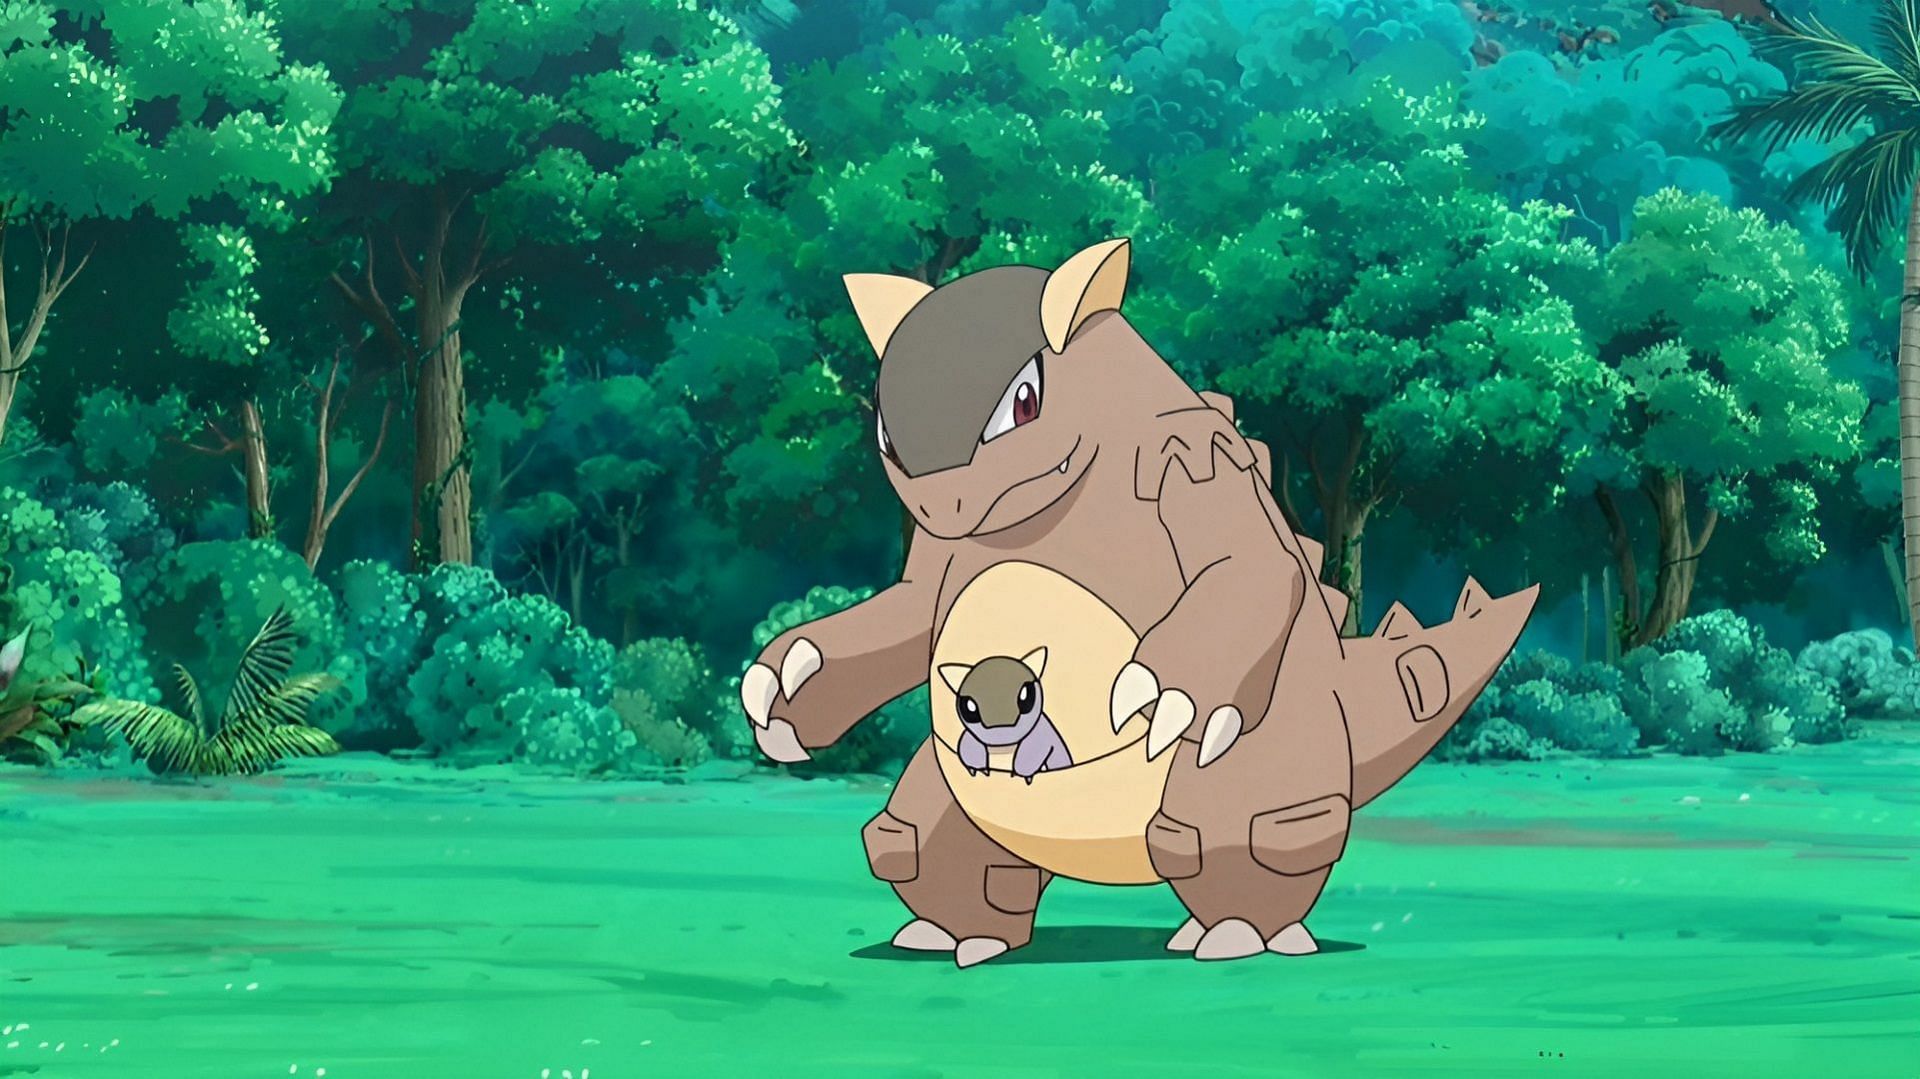 Kangaskhan was the Pokedle Classic answer for March 19, 2024. (Image via The Pokemon Company)